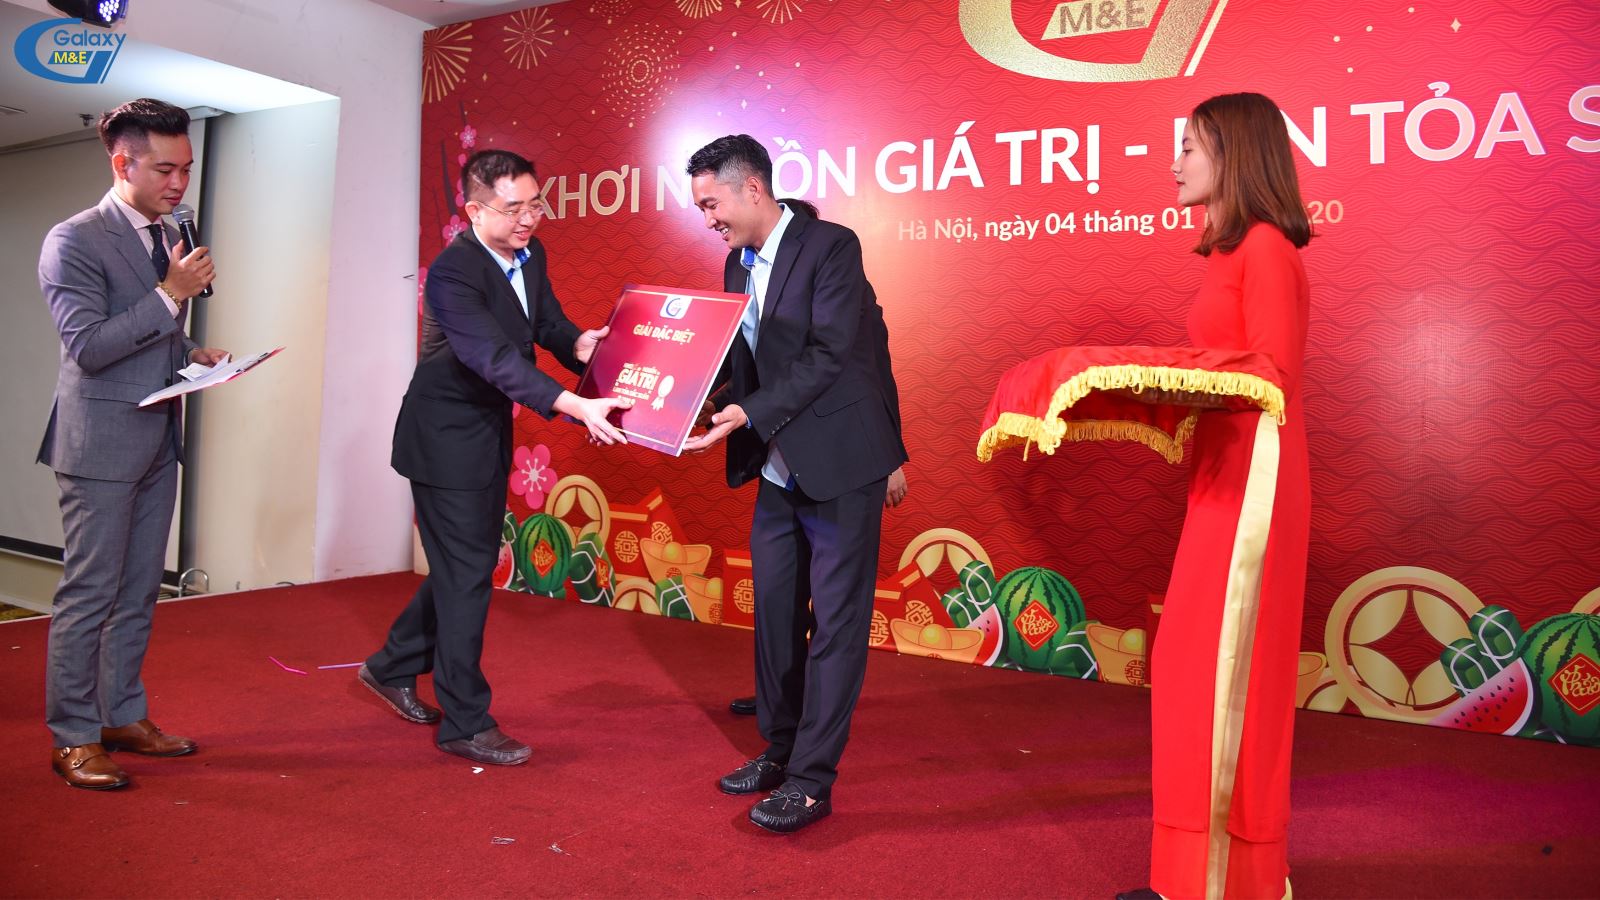 Mr. Do Dang Binh - Galaxy M&E Director personally gave the first prize to the program 